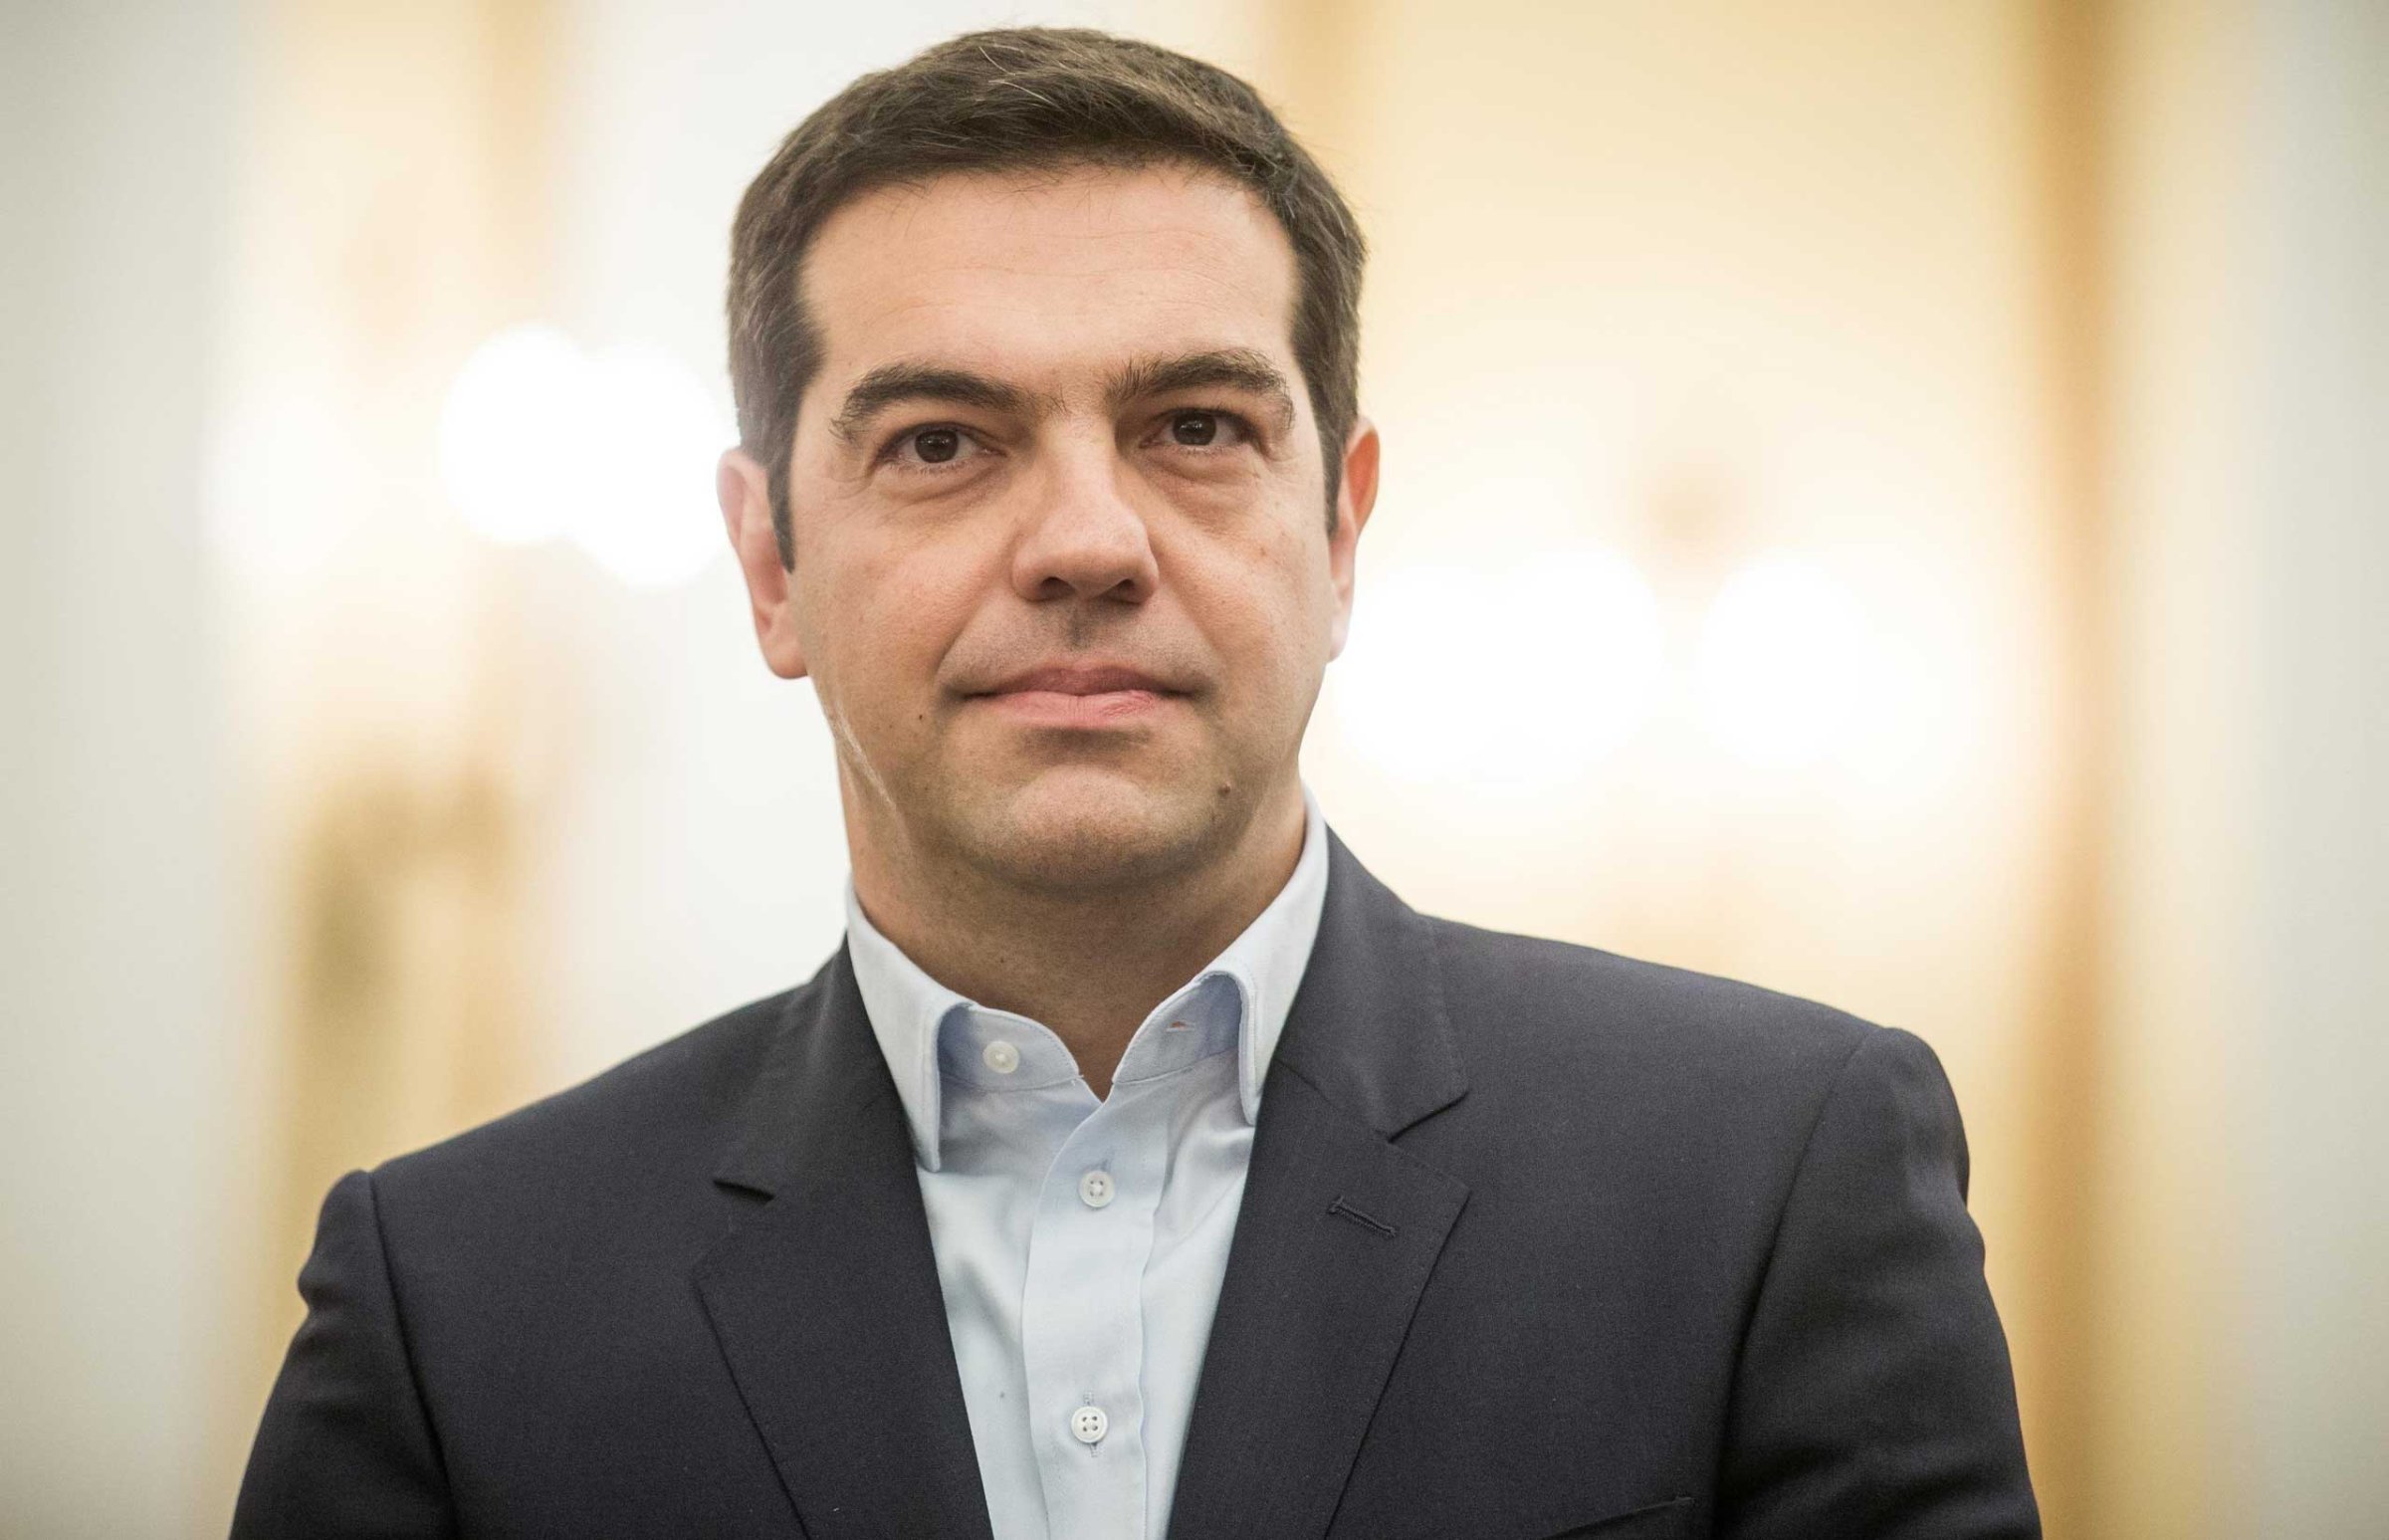 New prime minister Alexis Tsipras in Athens, Jan. 26, 2015.